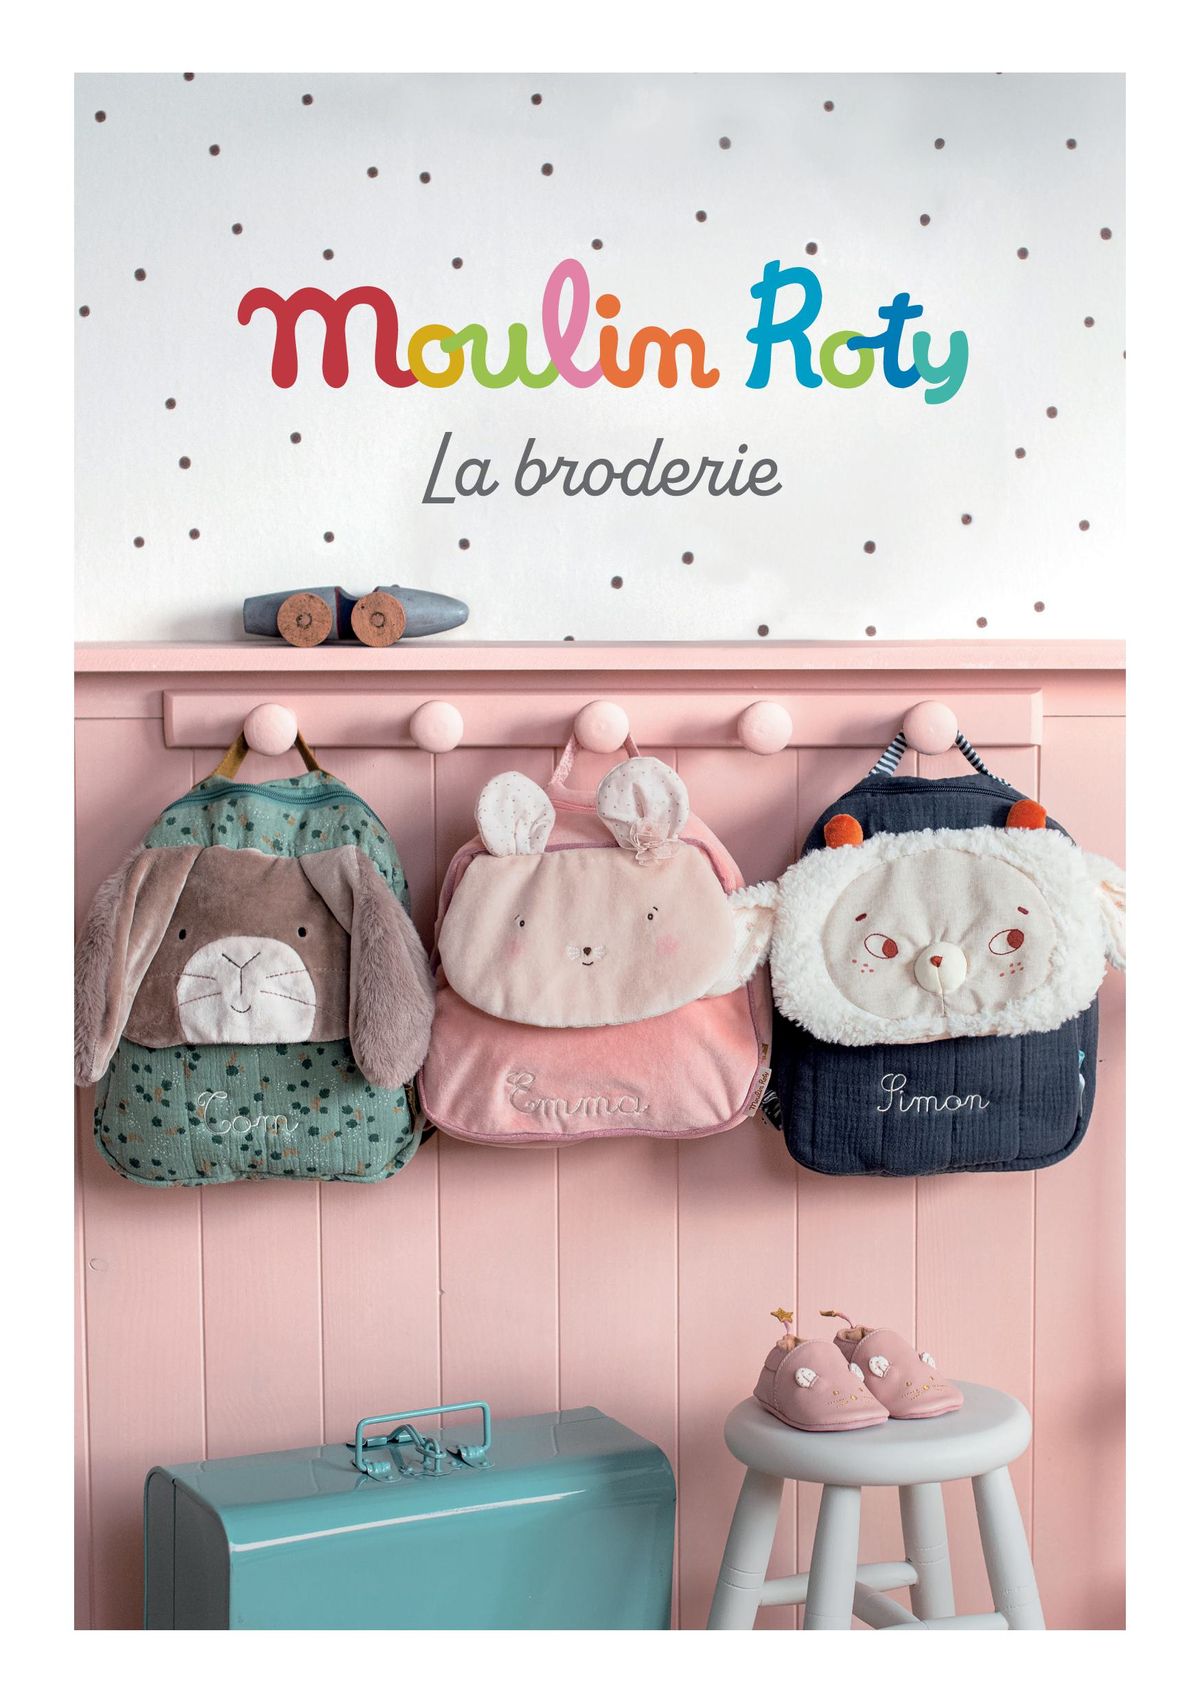 Catalogue Offres Moulin Roty, page 00001